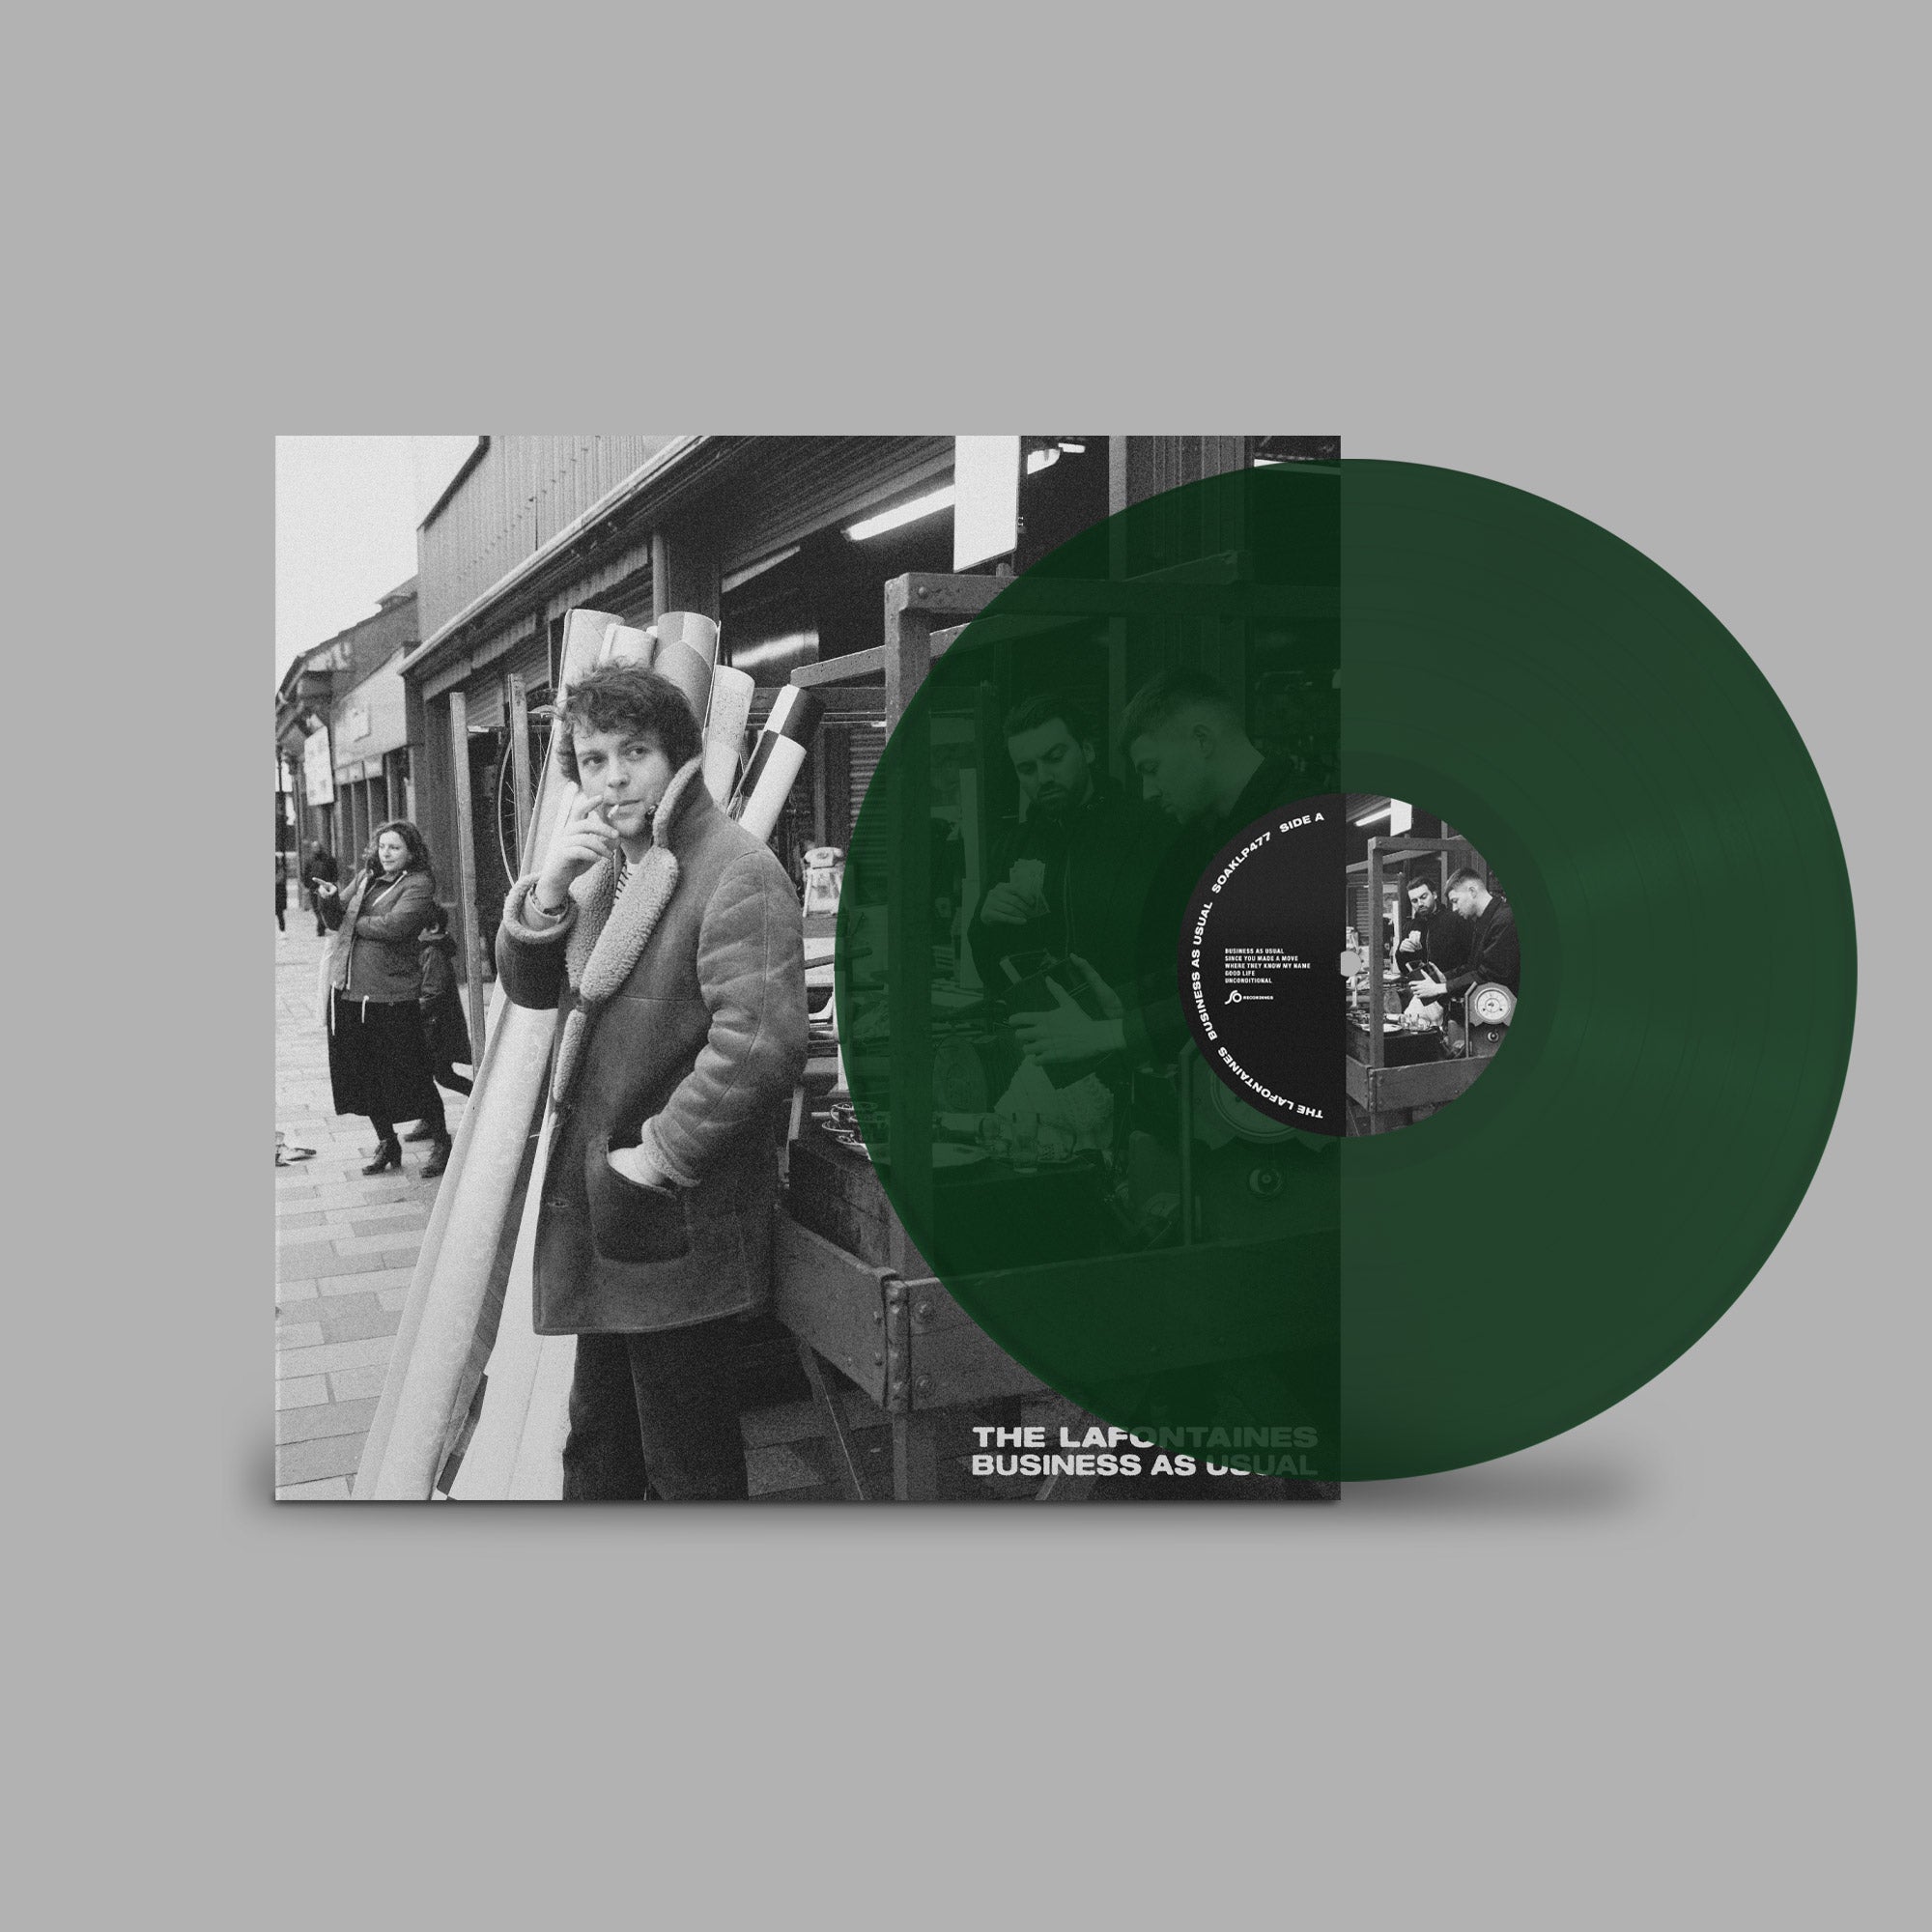 Business As Usual: Green Vinyl LP + Signed Print